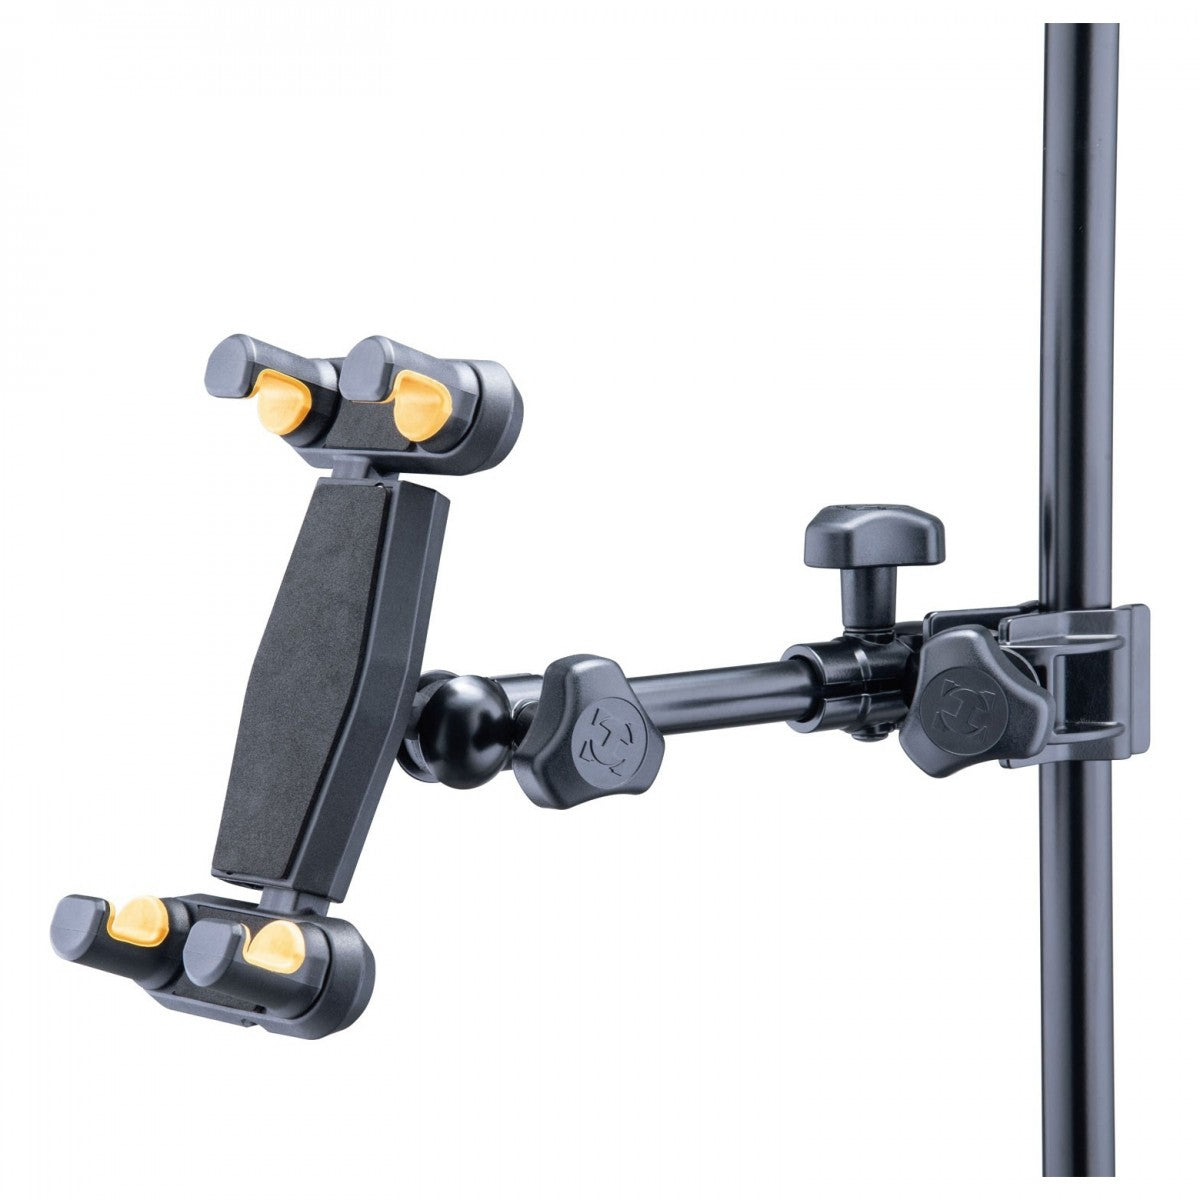 Hercules DG307B iPad & Tablet Holder Mic Stand Clamp - Fits 6.1"- 13" Tablets